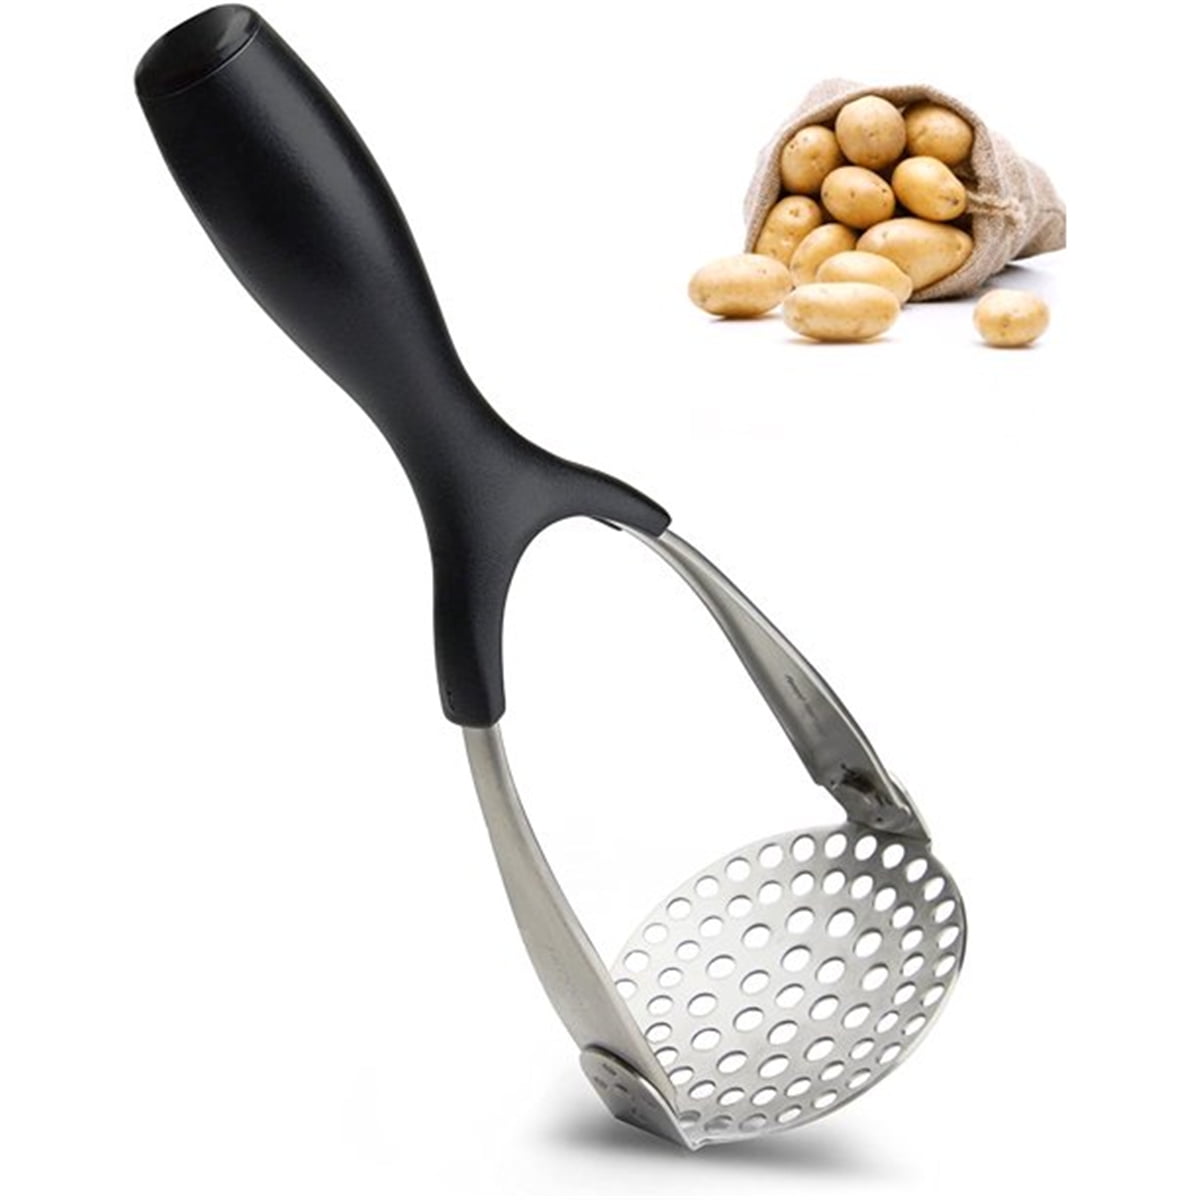 Potato Vegetable Strong Masher Kitchen Mainstay-Gadget Hand Tool 9.8 Metal